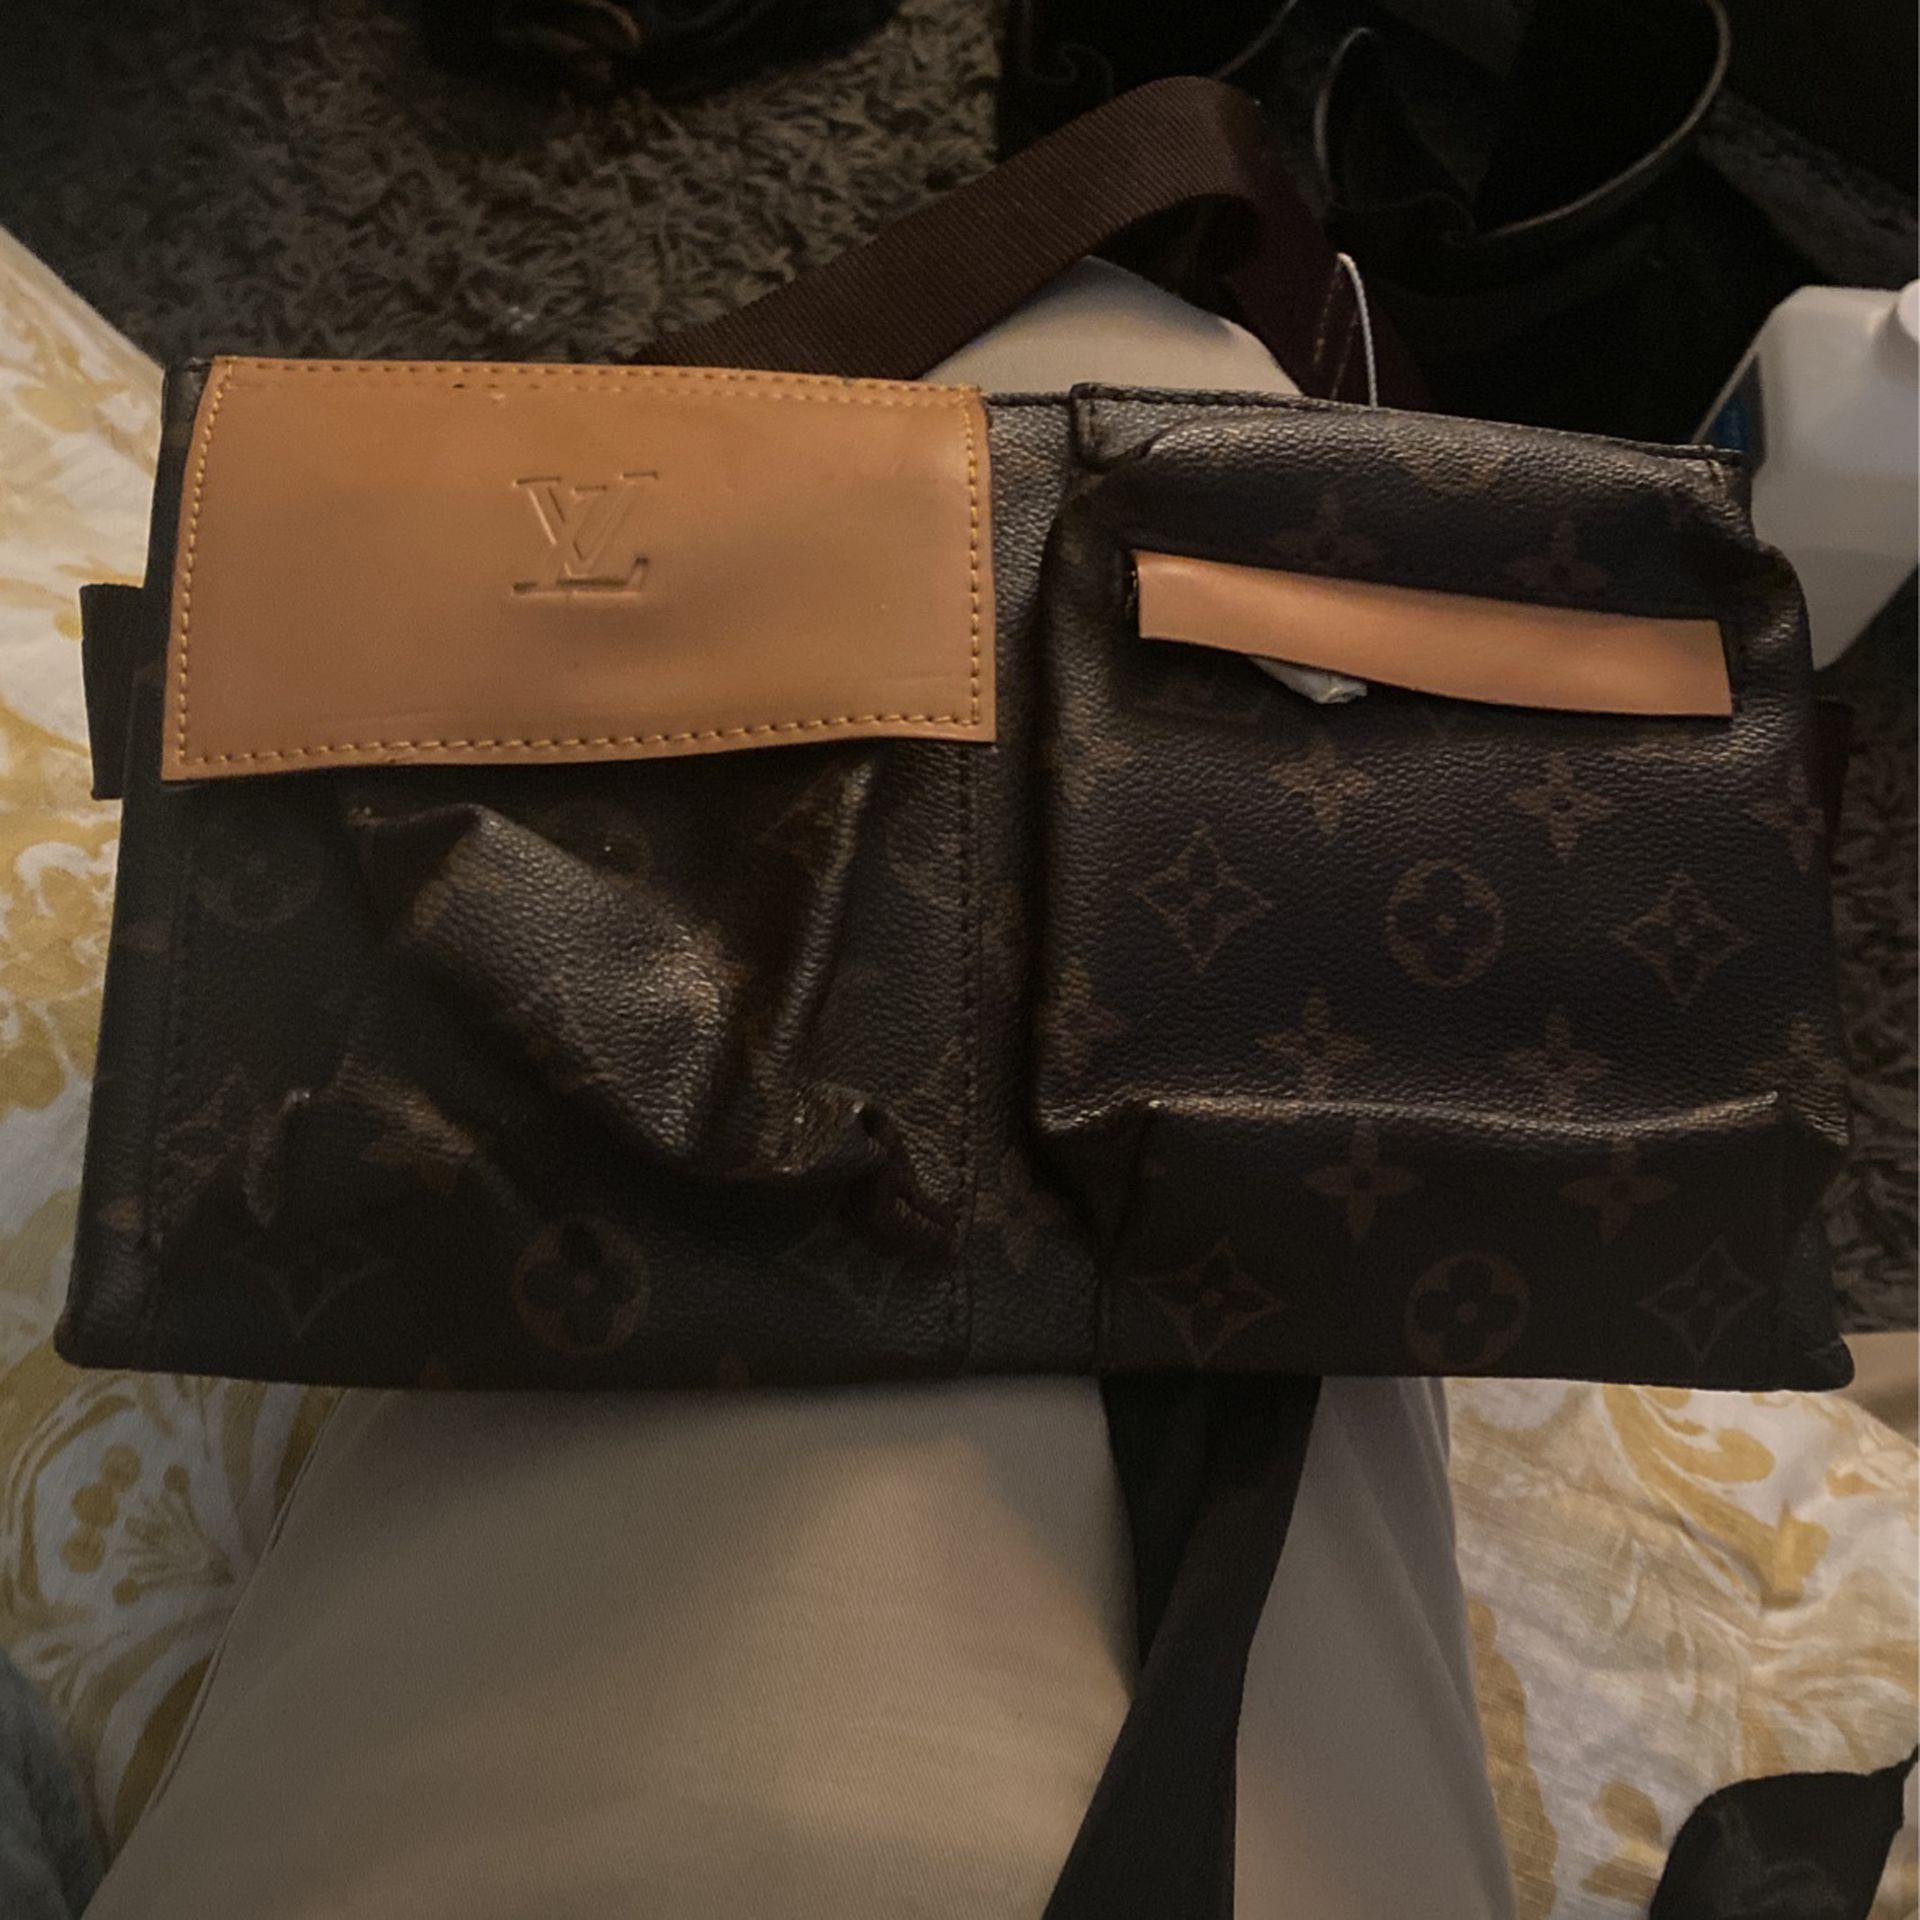 Louis Vuitton Wallet for Sale in The Bronx, NY - OfferUp